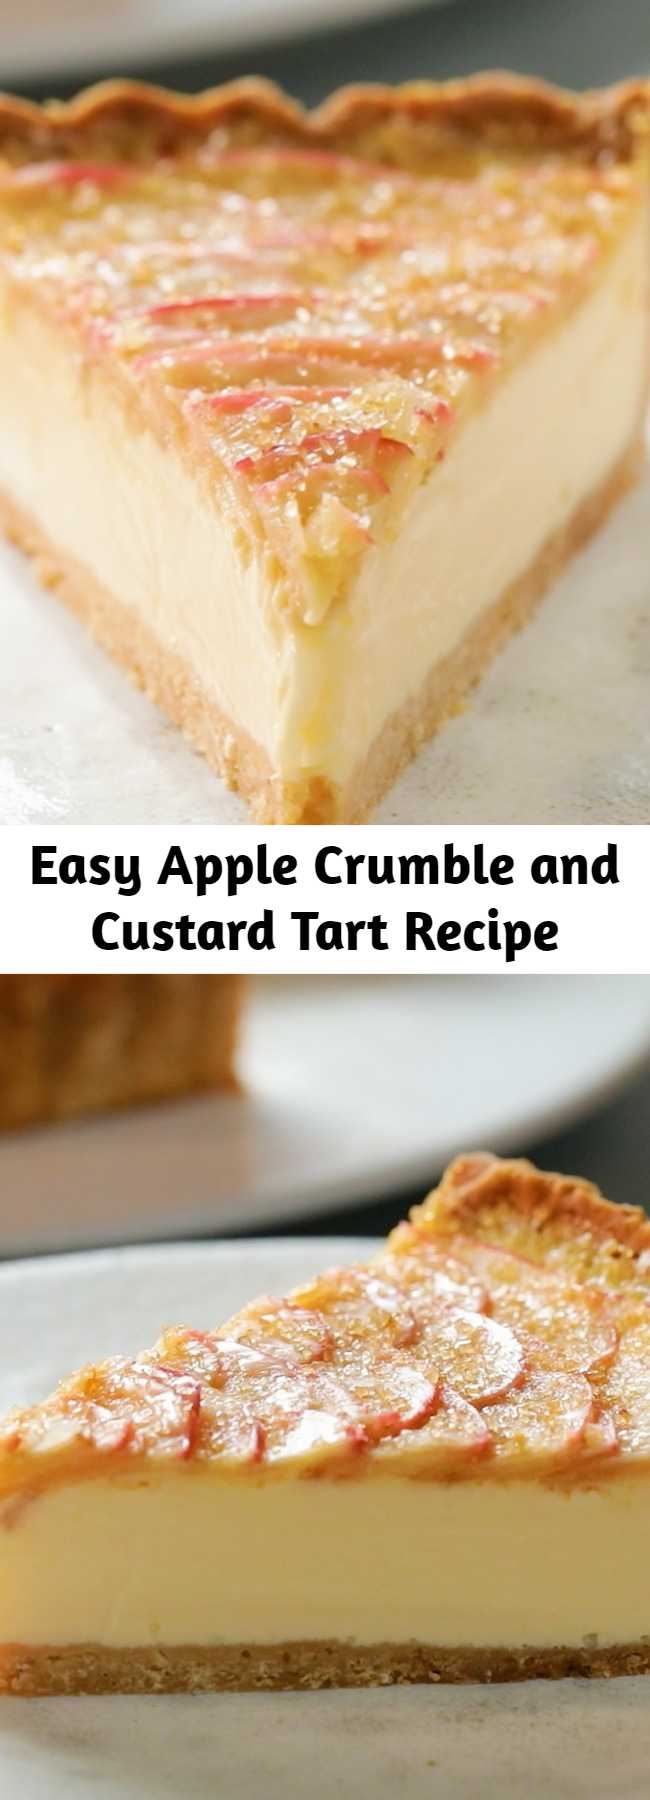 Easy Apple Crumble and Custard Tart Recipe - Ever wondered what an apple crumble tart would taste like with a custard filling? This easy recipe will become your best go-to dessert for any occasion, summer and fall alike.